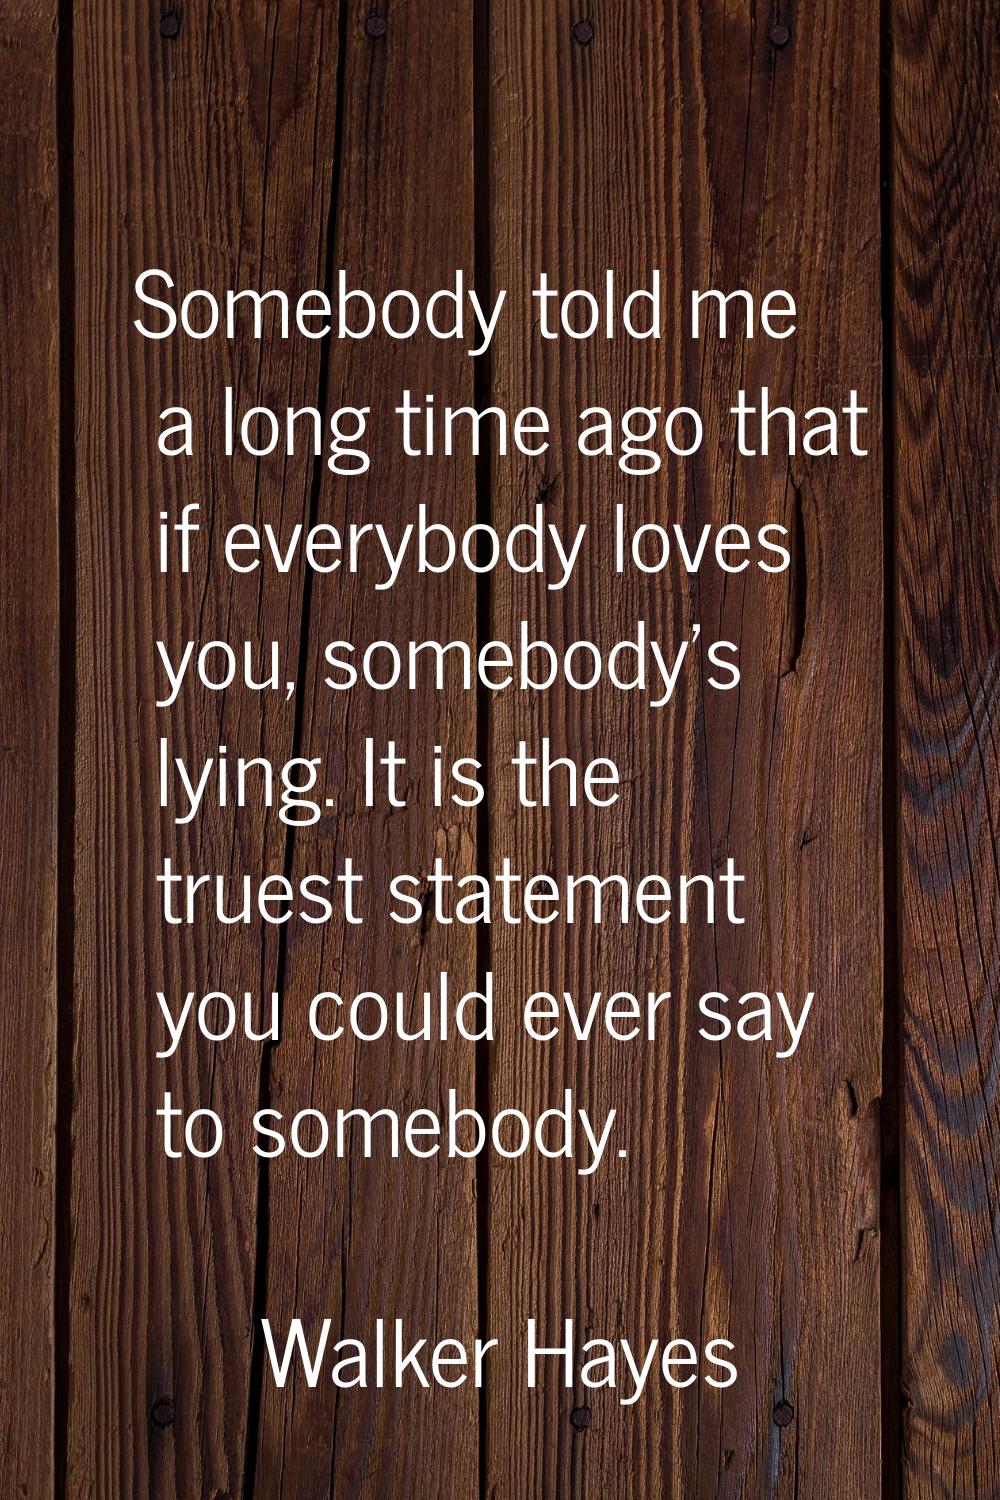 Somebody told me a long time ago that if everybody loves you, somebody's lying. It is the truest st